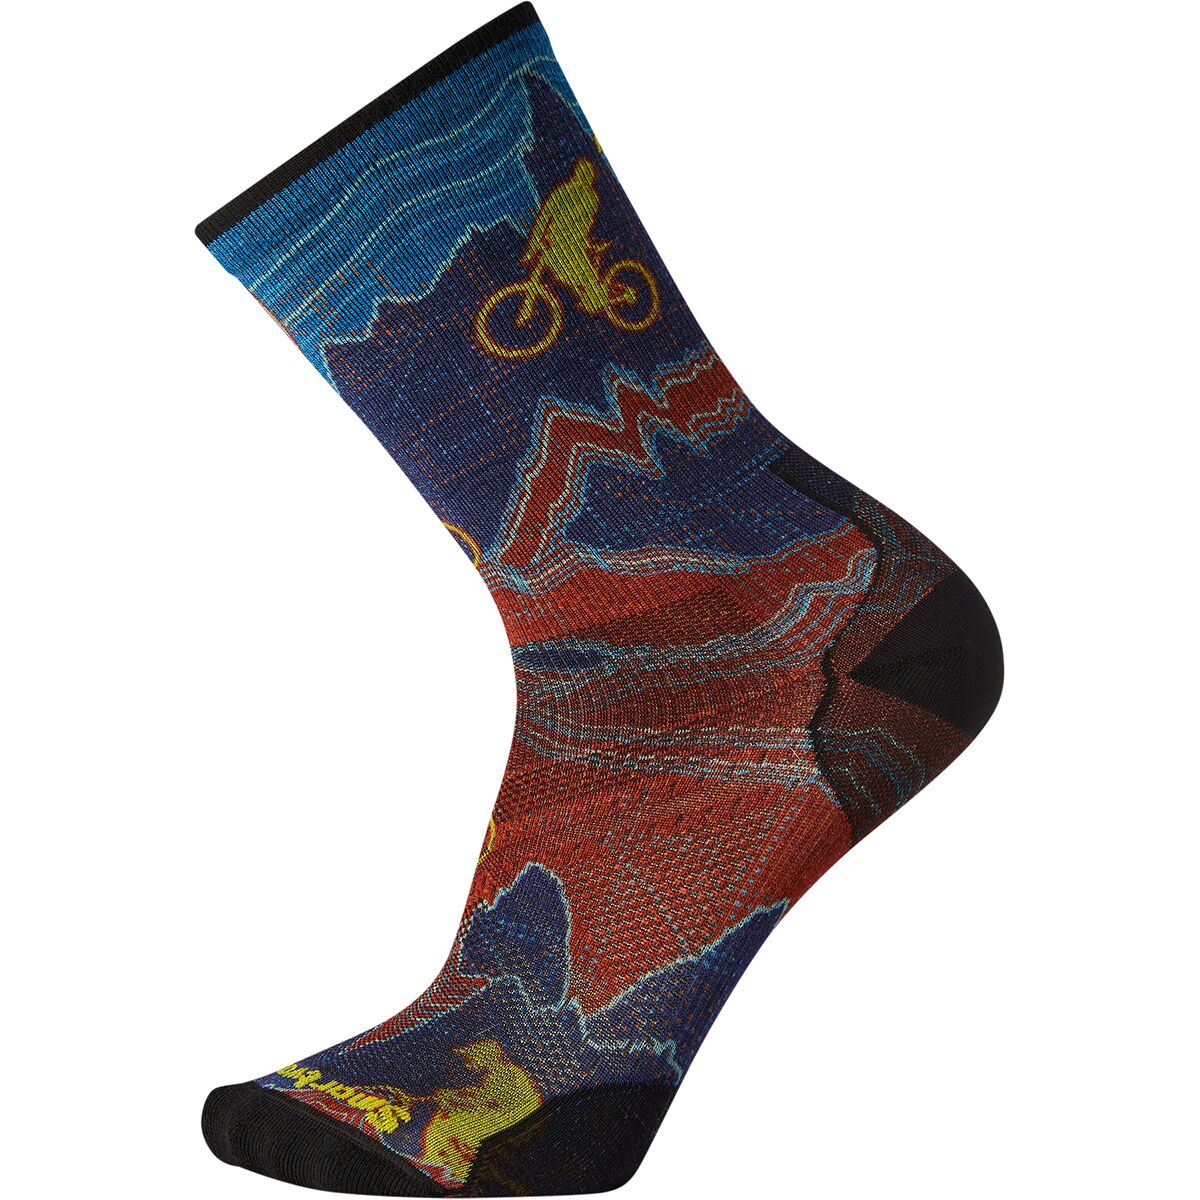 Smartwool Performance Cycle Ultra Light Divide Trail Print Crew Sock